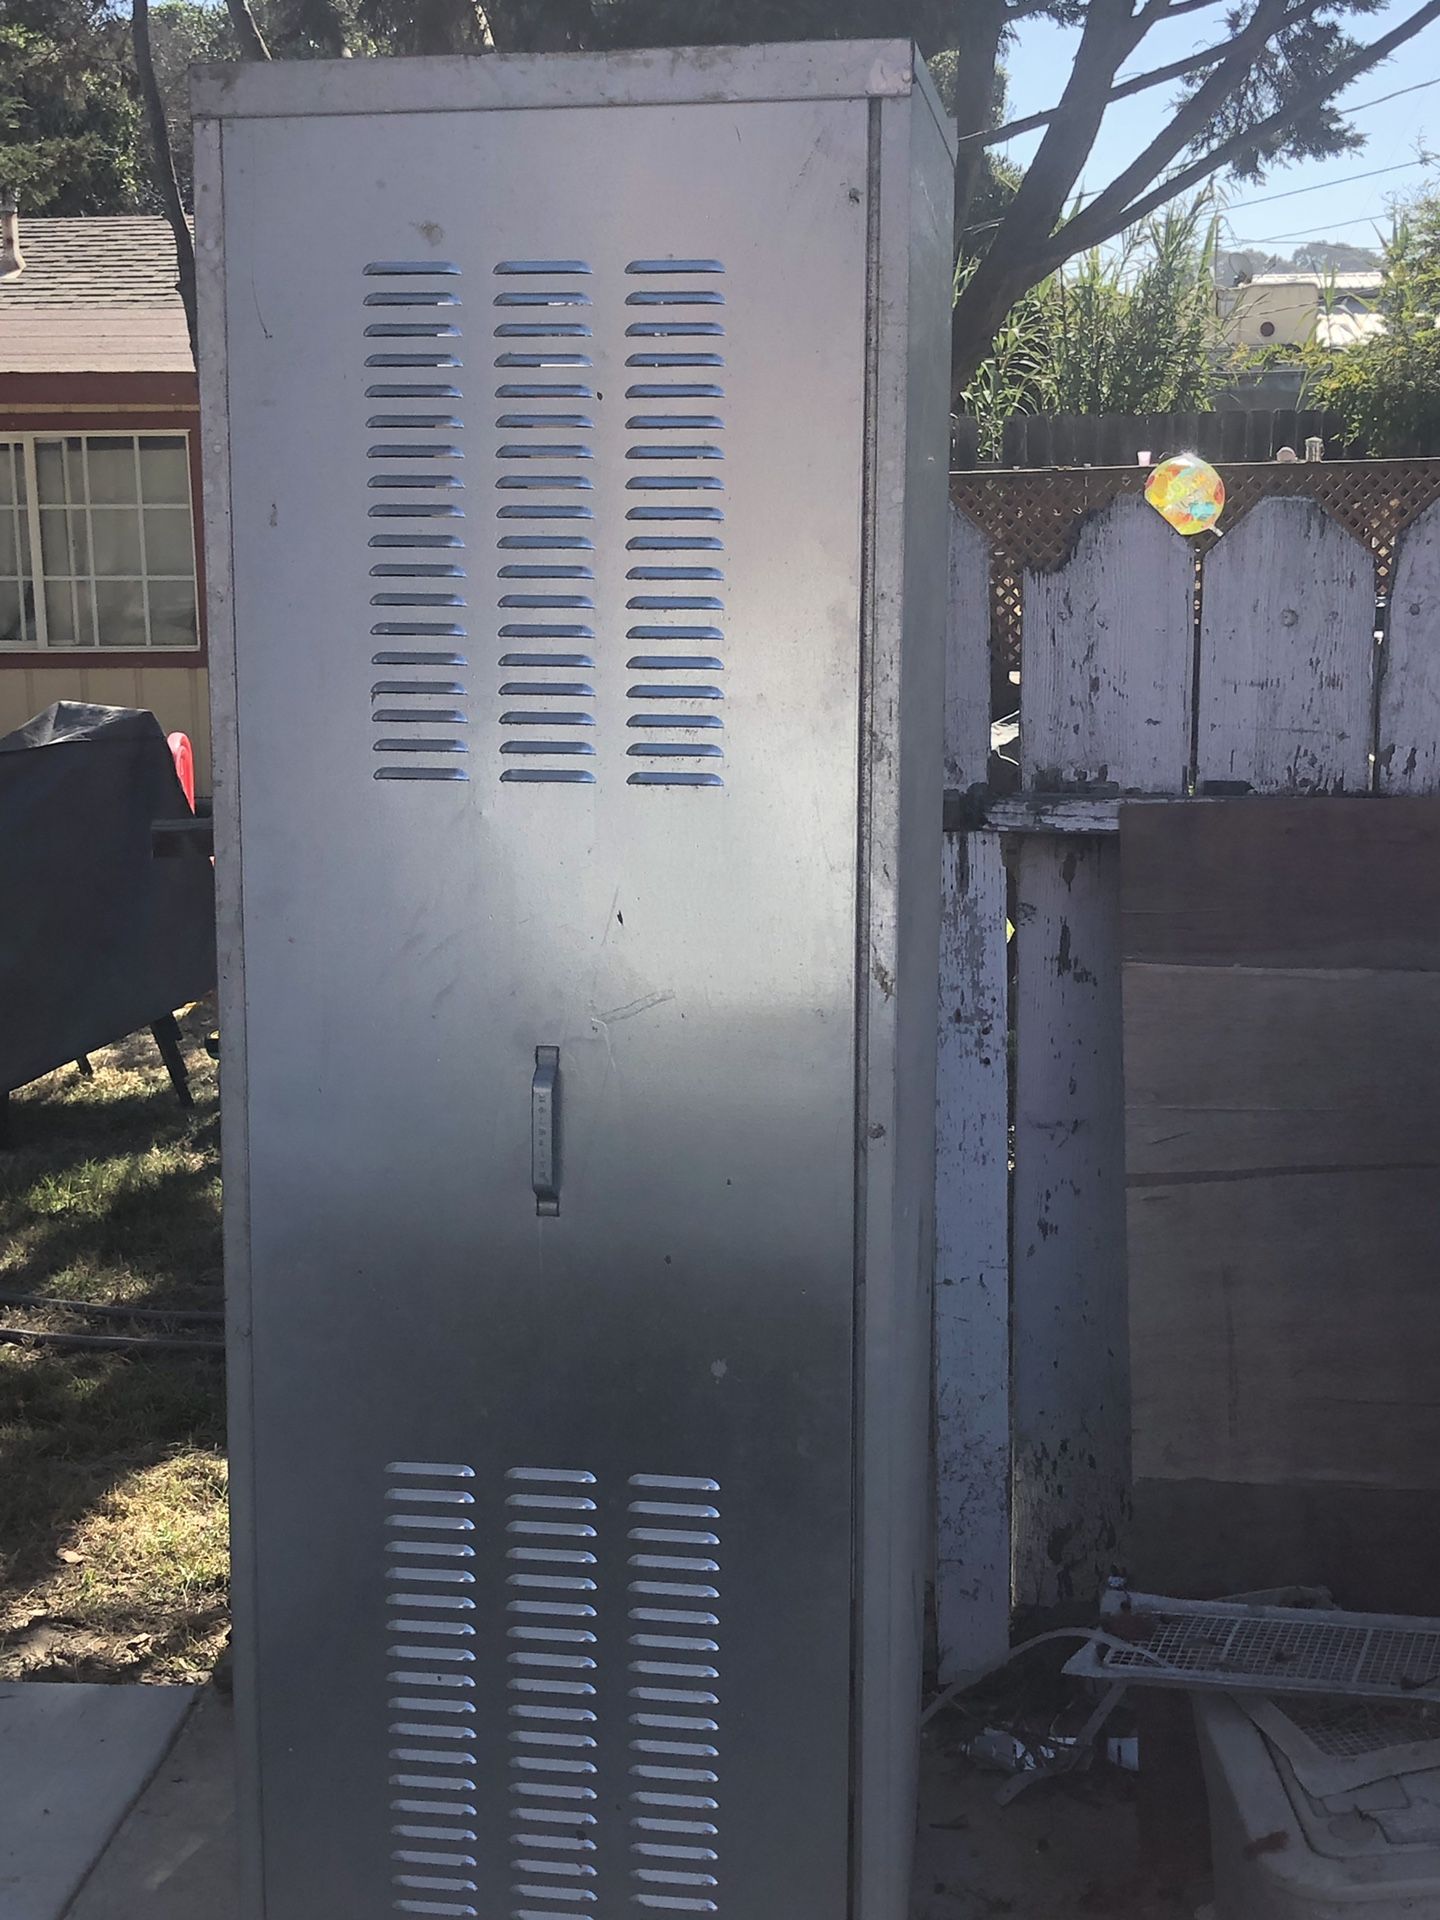 2 NEW GALVANIZED WATER HEATER CABINETS, NEVER USED